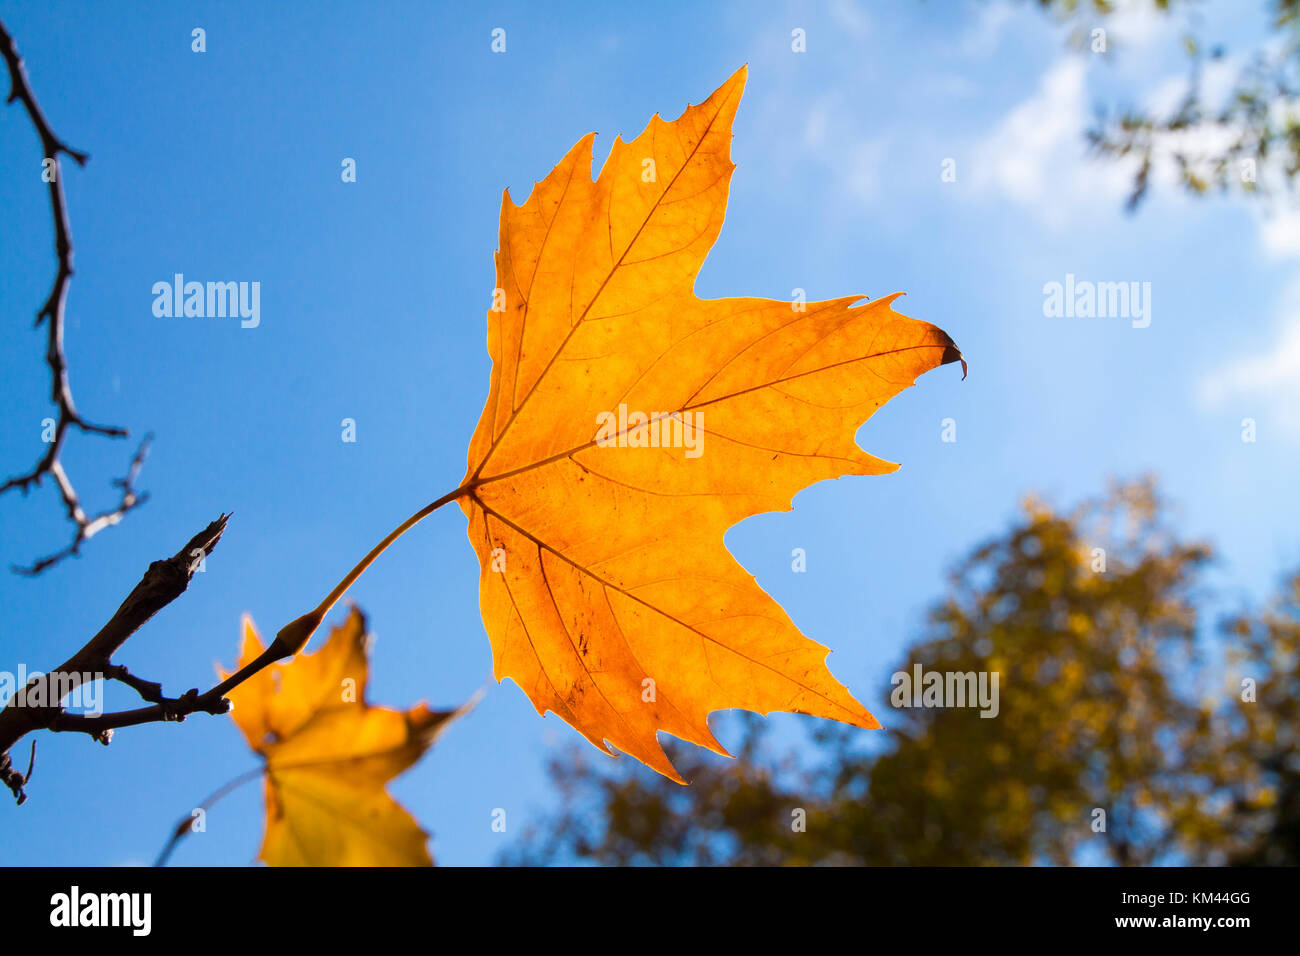 Autumn leaf in front of sky Stock Photo